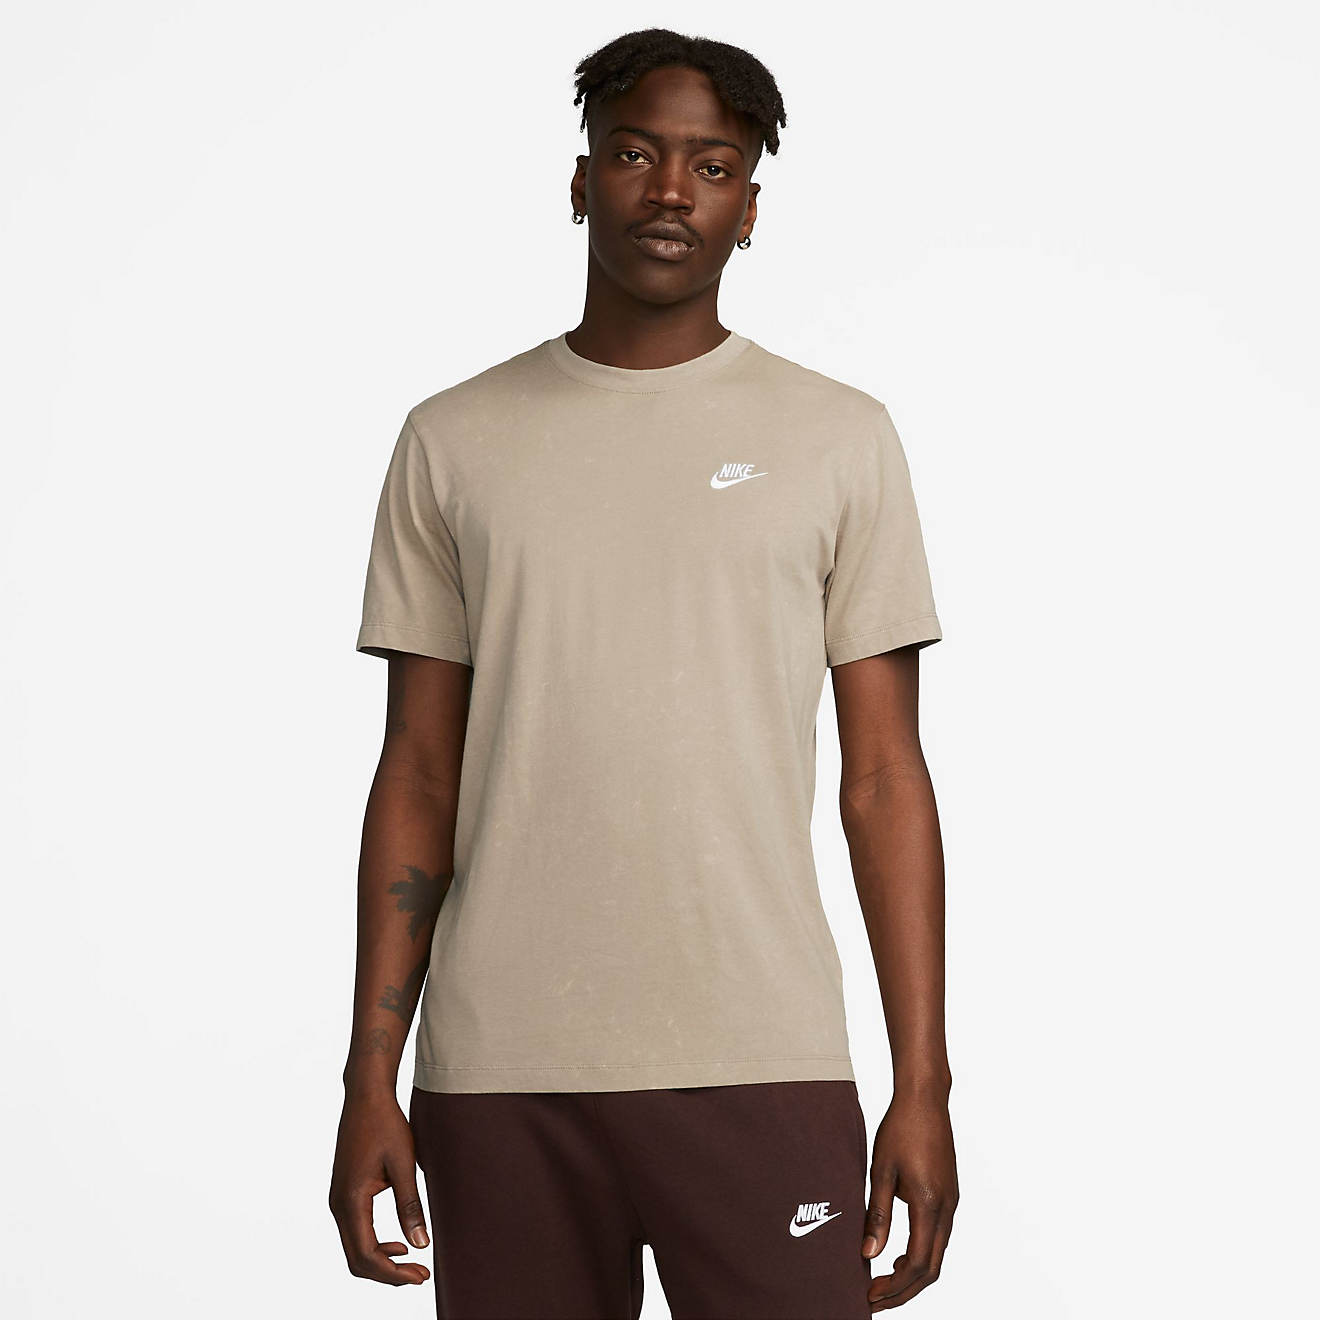 Nike Men's NSW Novelty Club T-shirt | Free Shipping at Academy